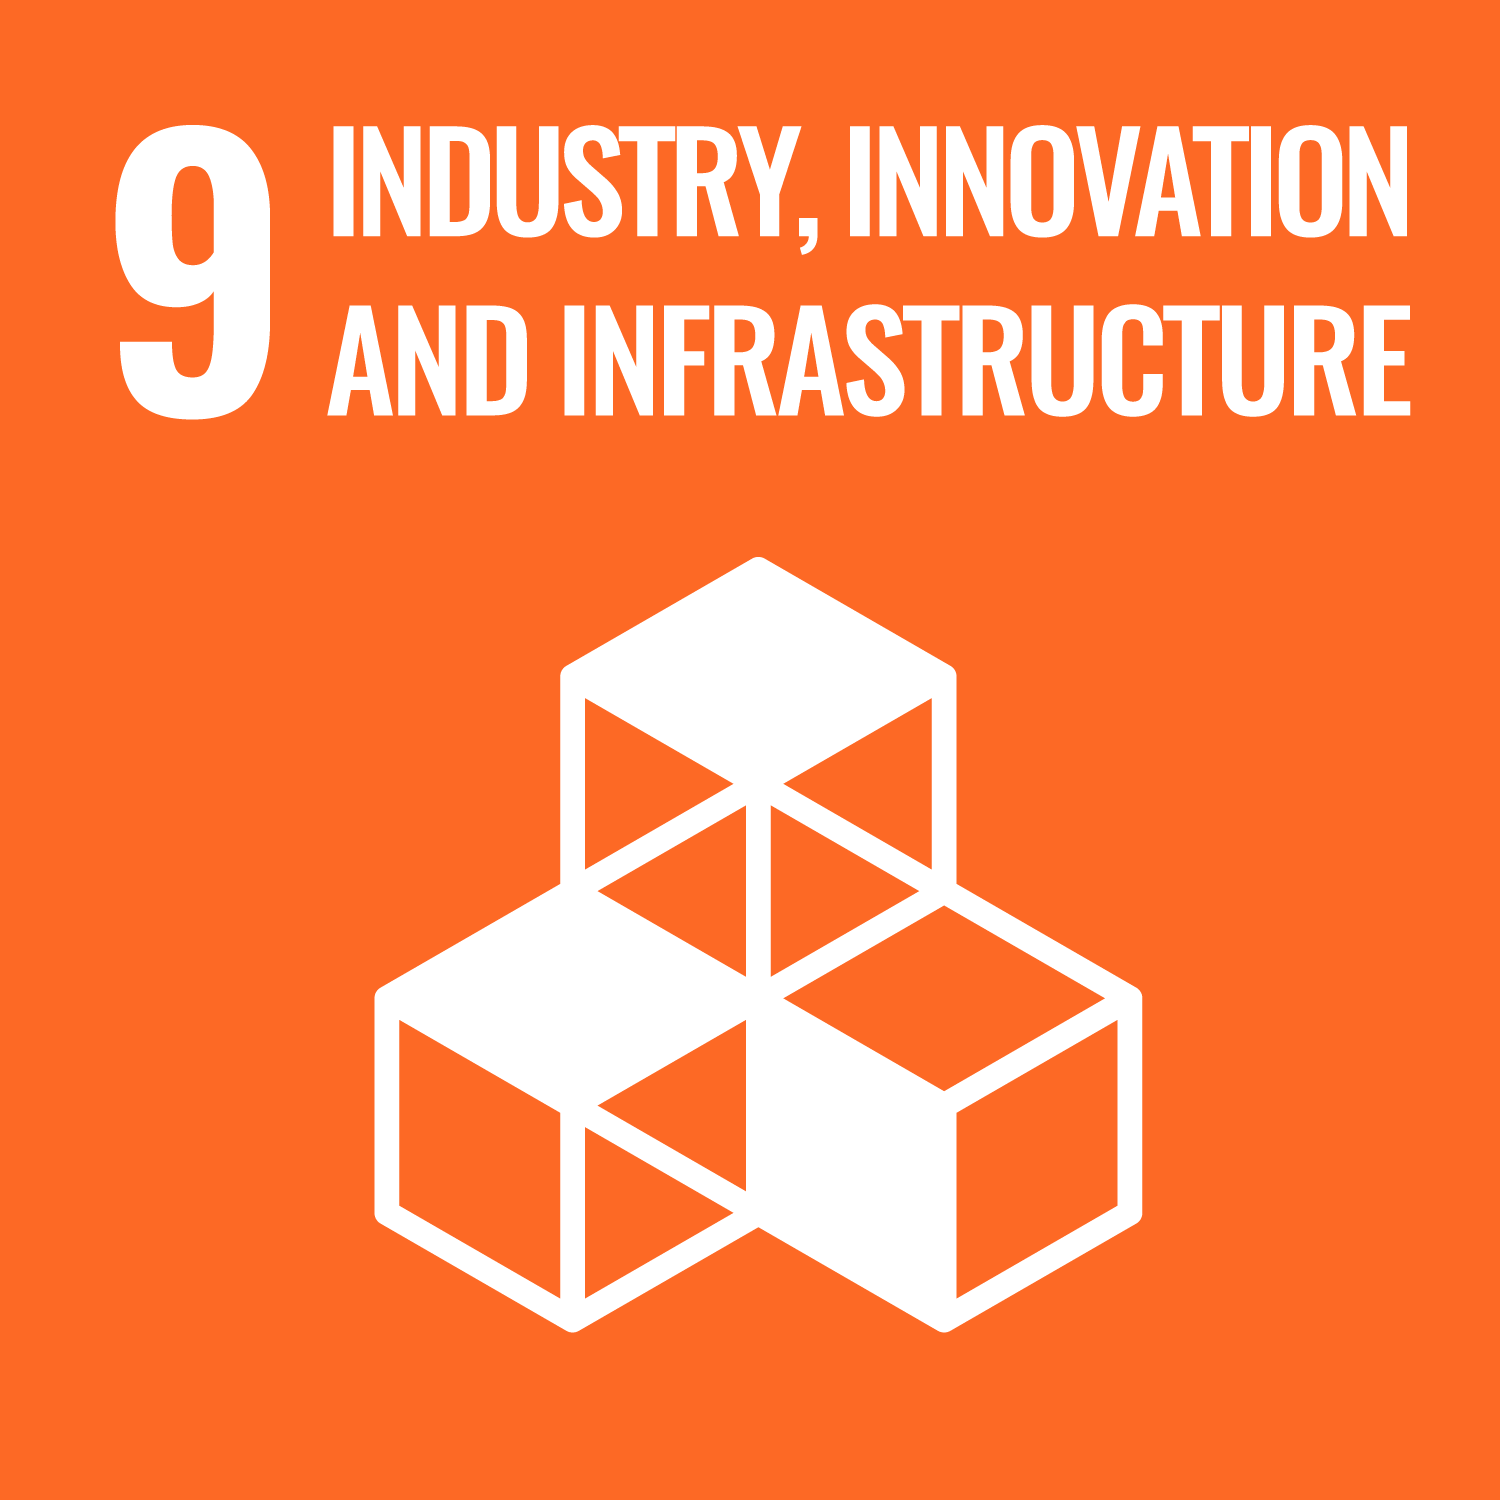 UN Sustainable Development Goal 9 - Industry, Innovation and Infrastructure